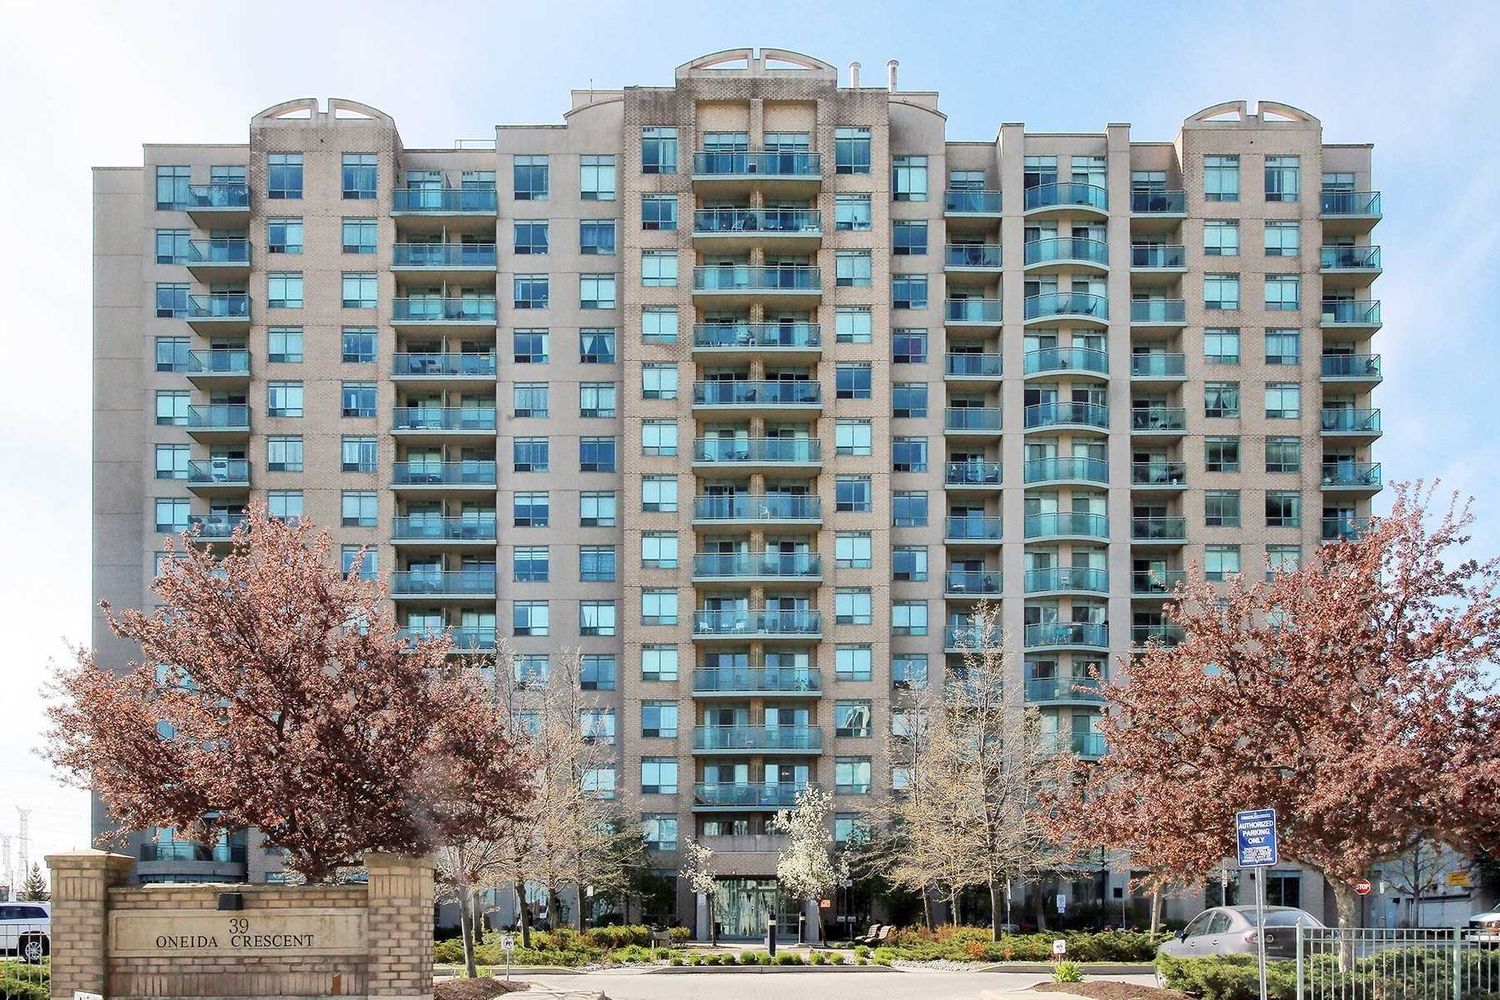 39 Oneida Crescent. The Gates of Bayview Glen V Condos is located in  Richmond Hill, Toronto - image #1 of 3